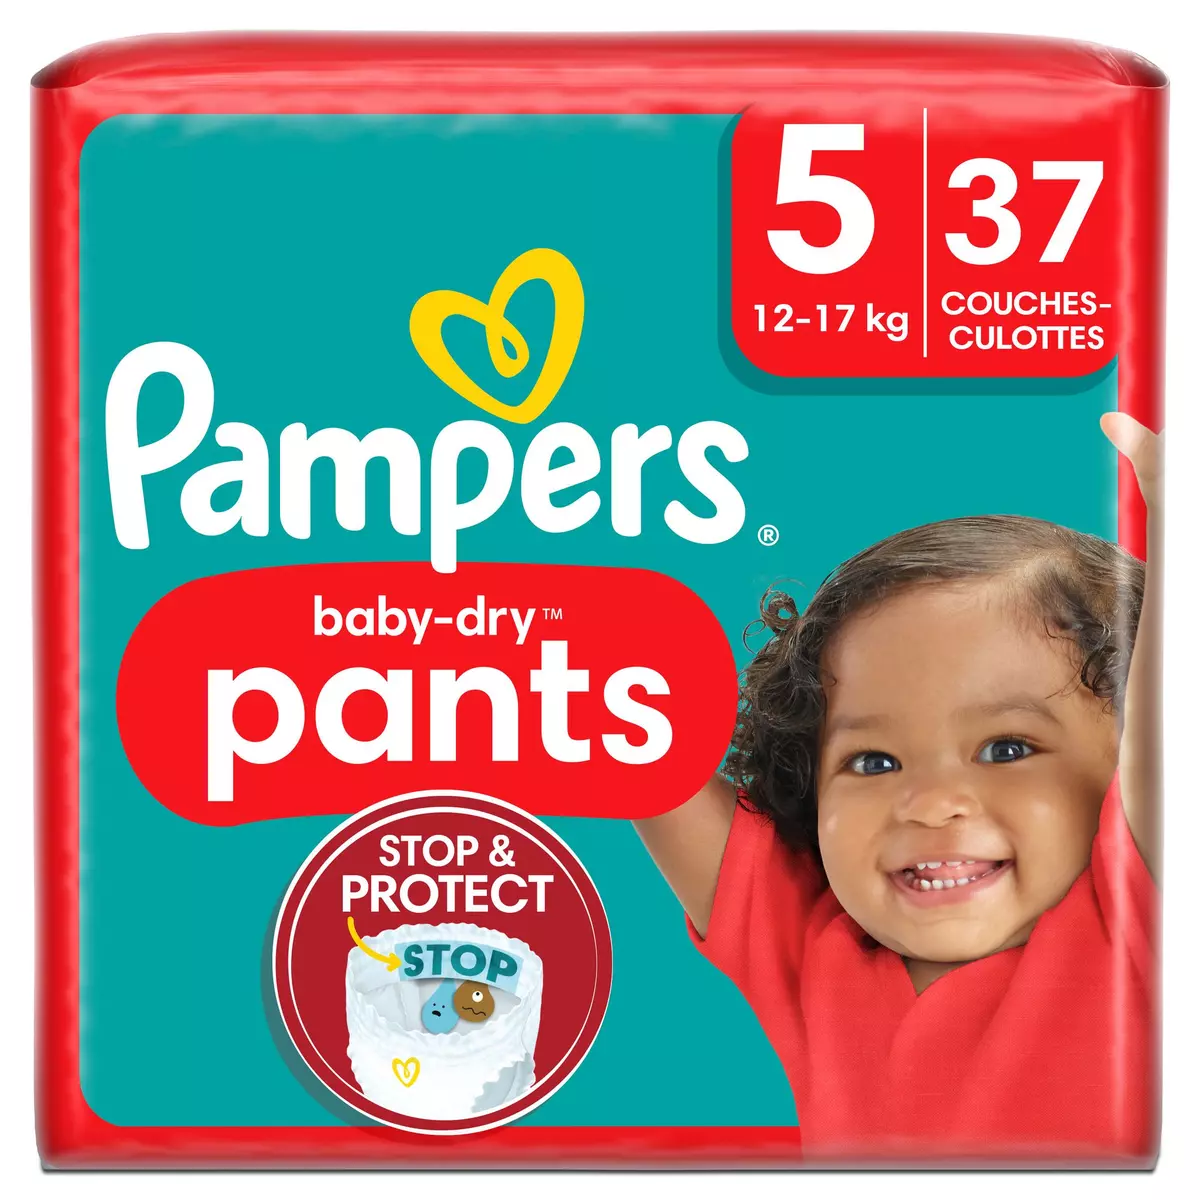 PAMPERS Baby-dry pants couches taille 5 (12-17kg) 37 couches pas cher 